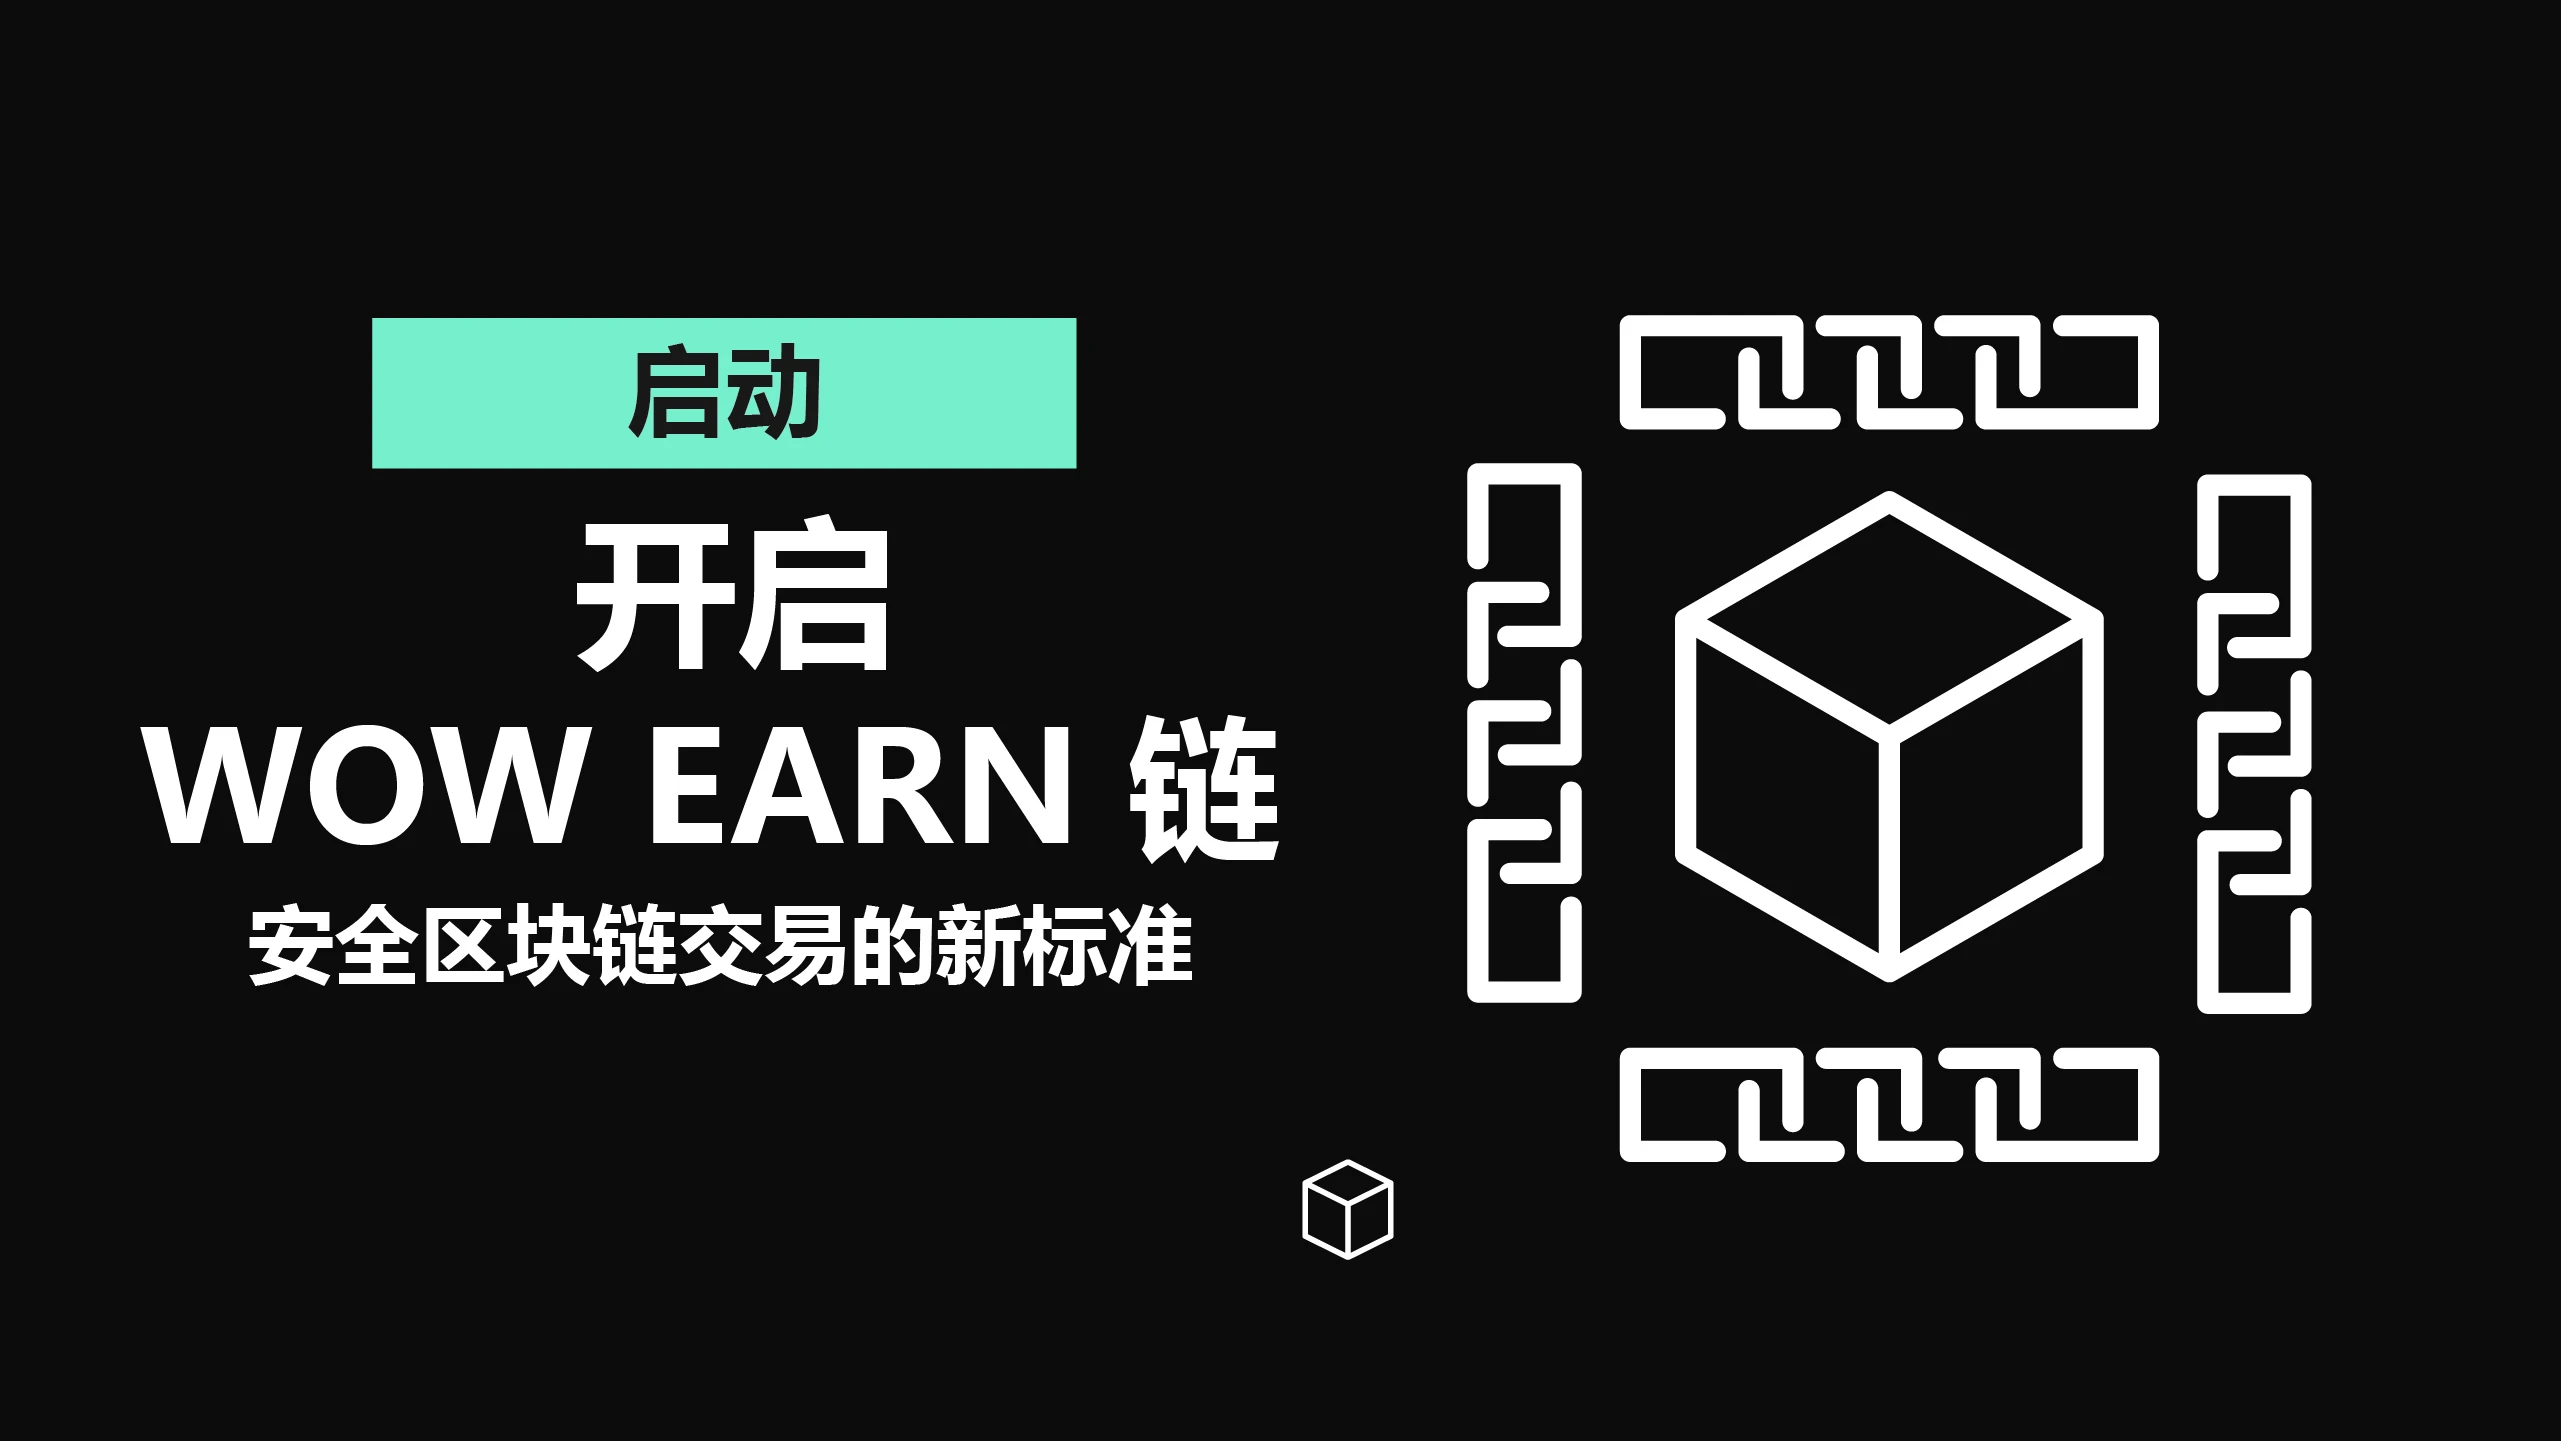 WOW EARN: A high-performance public chain based on EVM that is compatible with Layer 1 and integrates 10 networks including Base and OKChain.